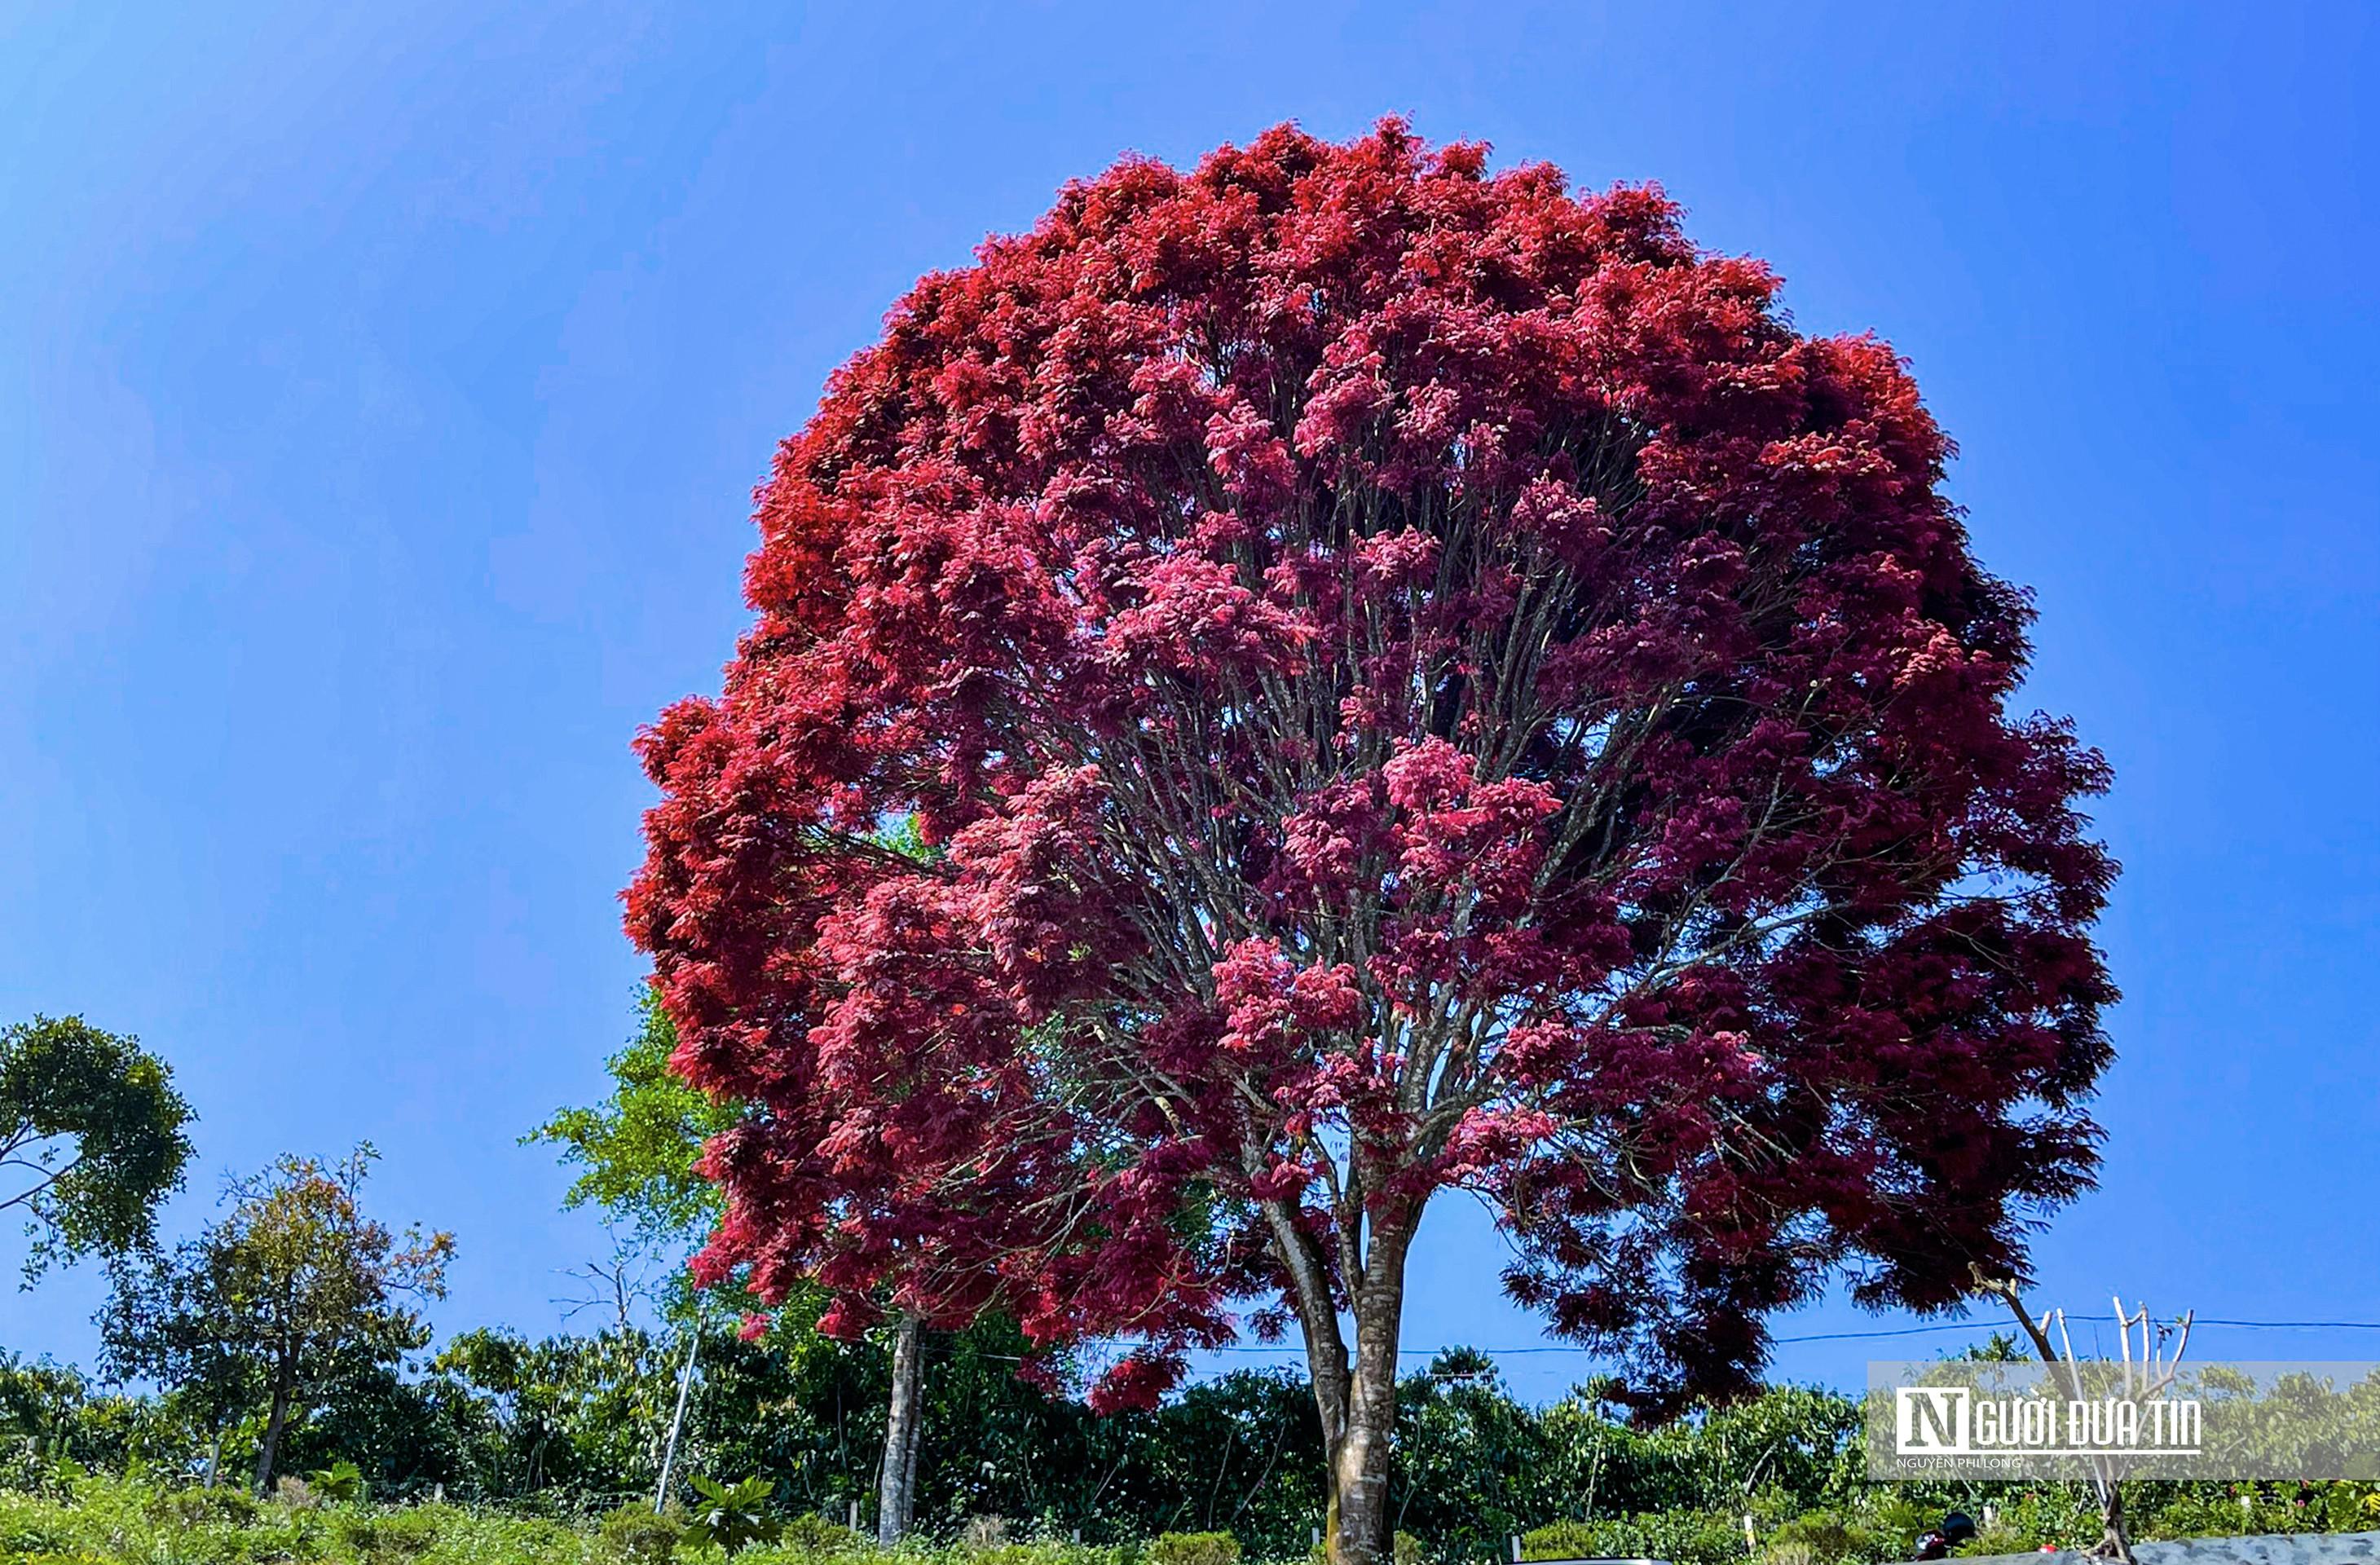 Delighted with the image of the red leaf brooch blooming on the Lam Dong plateau - 1